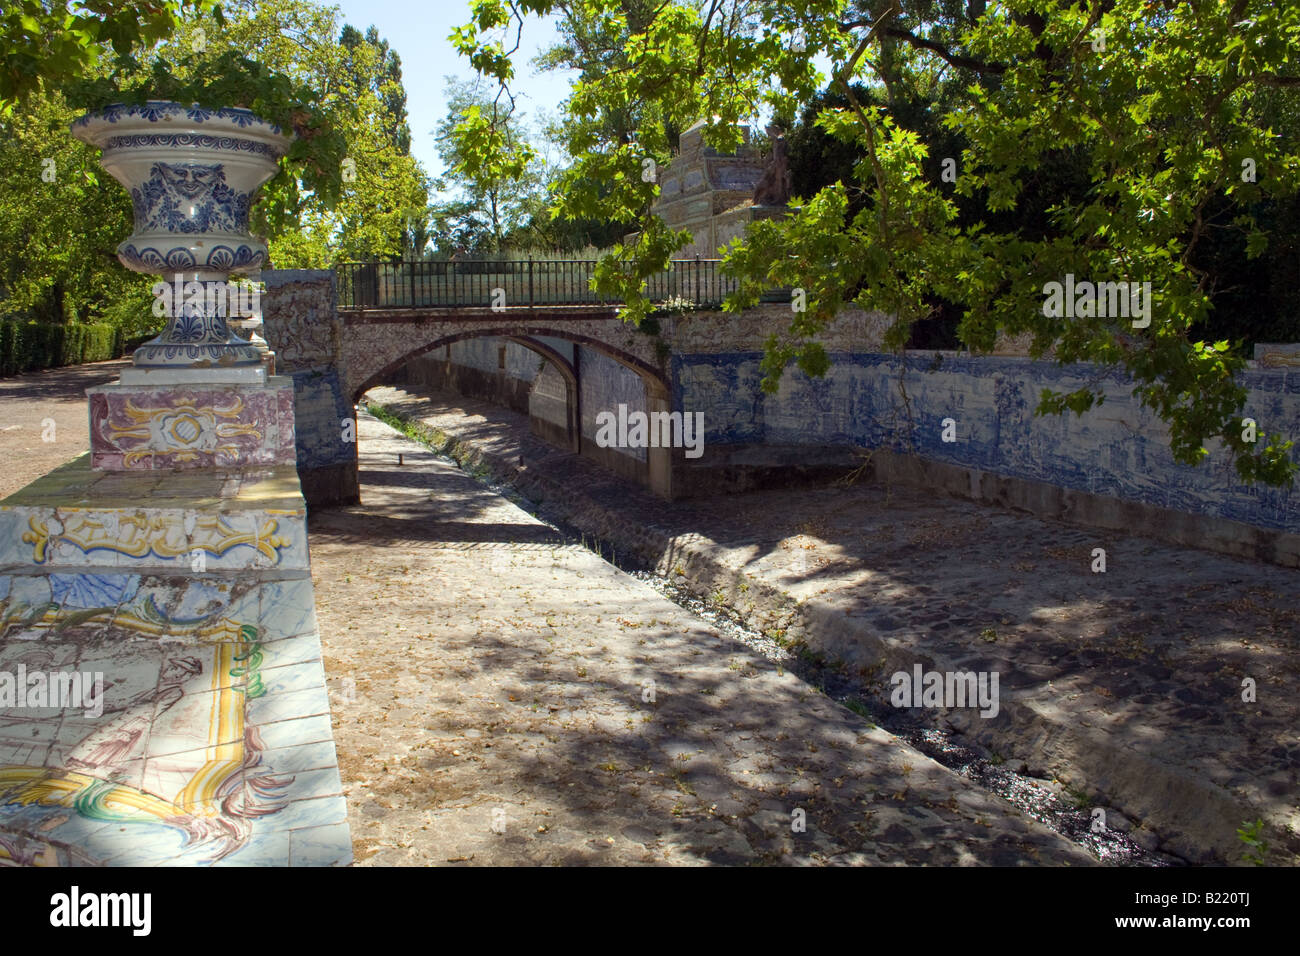 Queluz palace gardens. In this image it’s shown the Jamor river canal which is decorated with traditional Portuguese tiles. Stock Photo